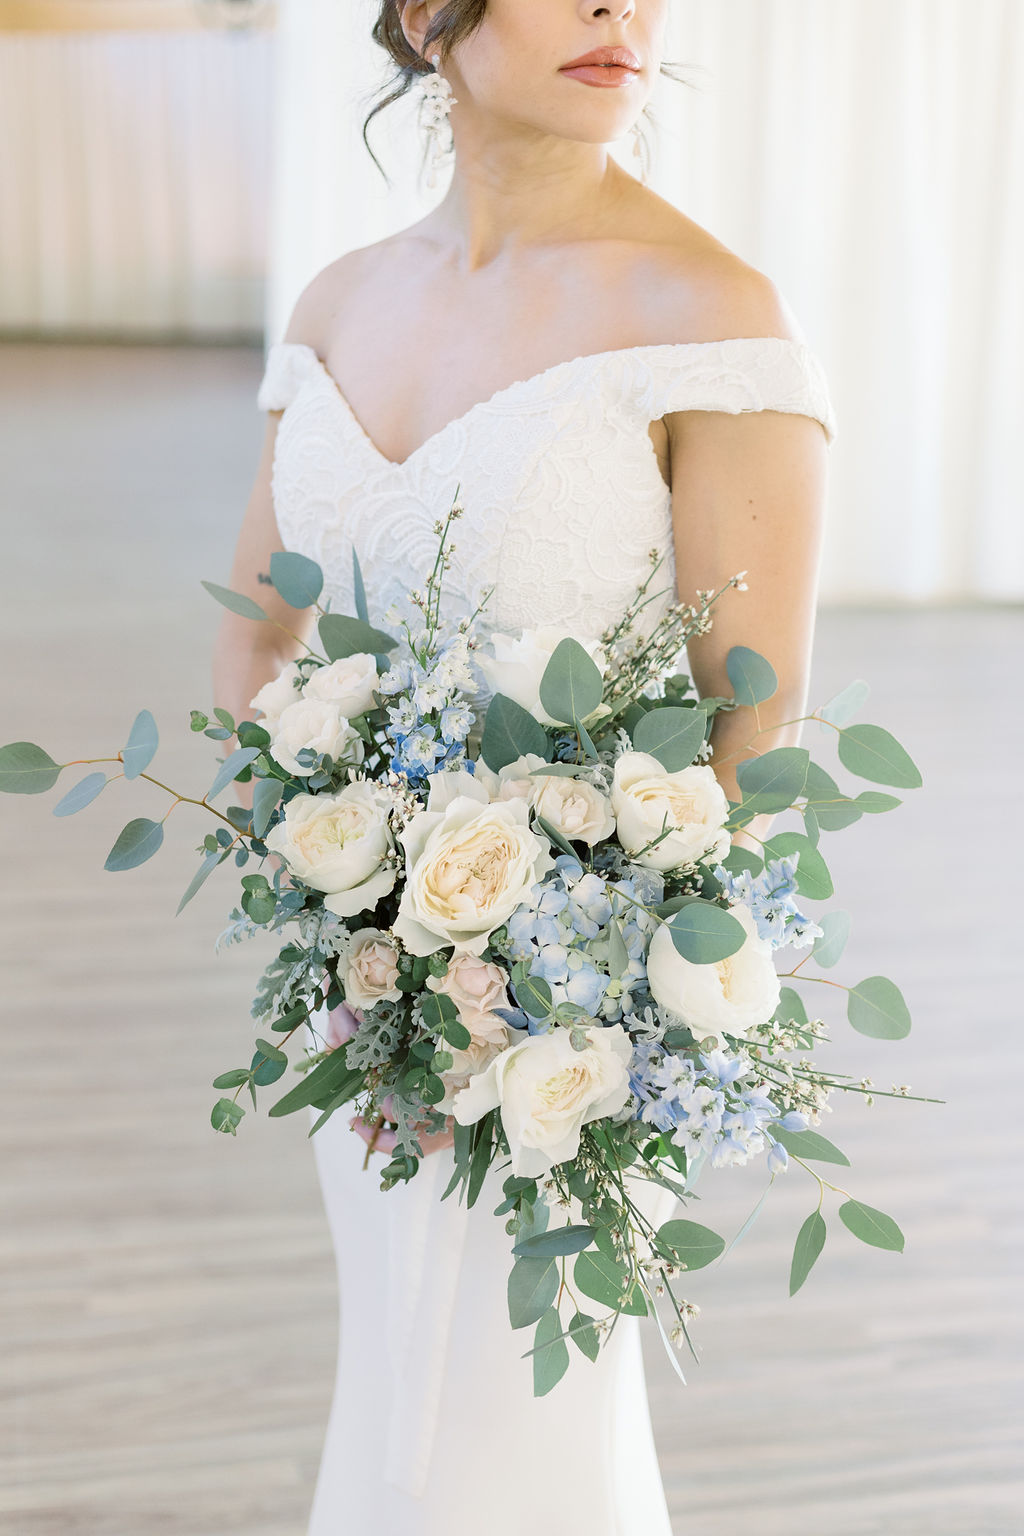 Clasic bride in off the shoulder gown holding white and light blue wedding bouquet